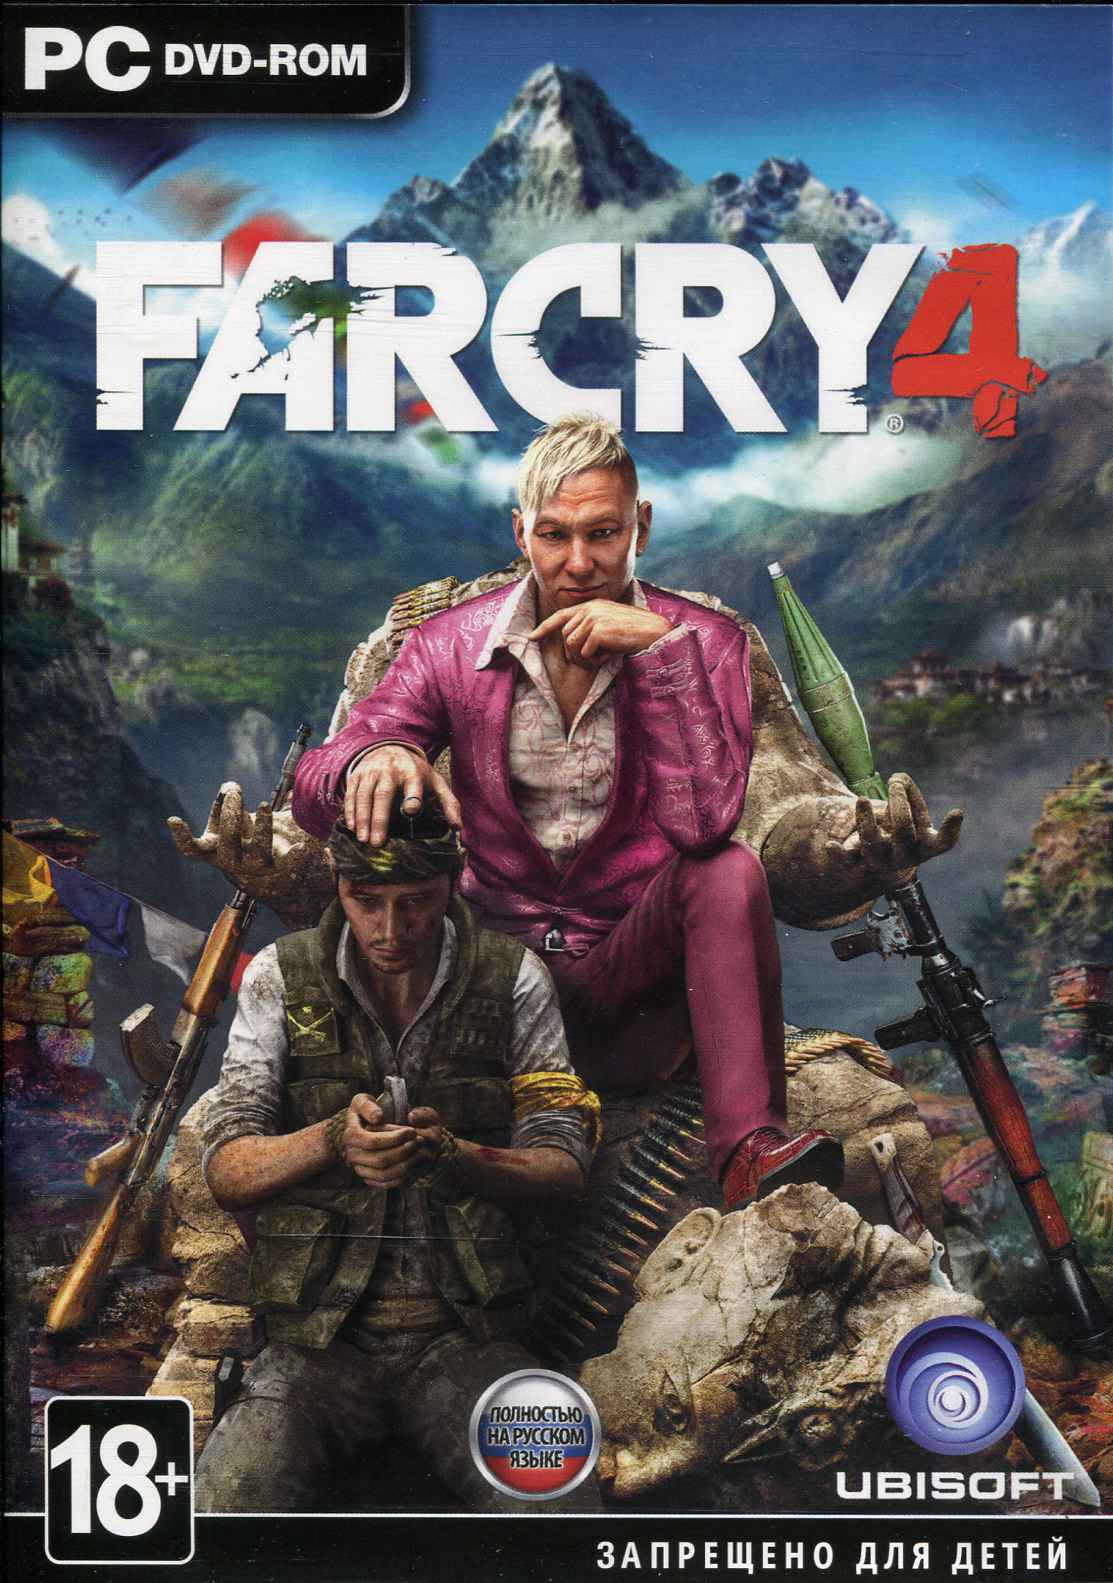 Far cry 4 pc download torrent